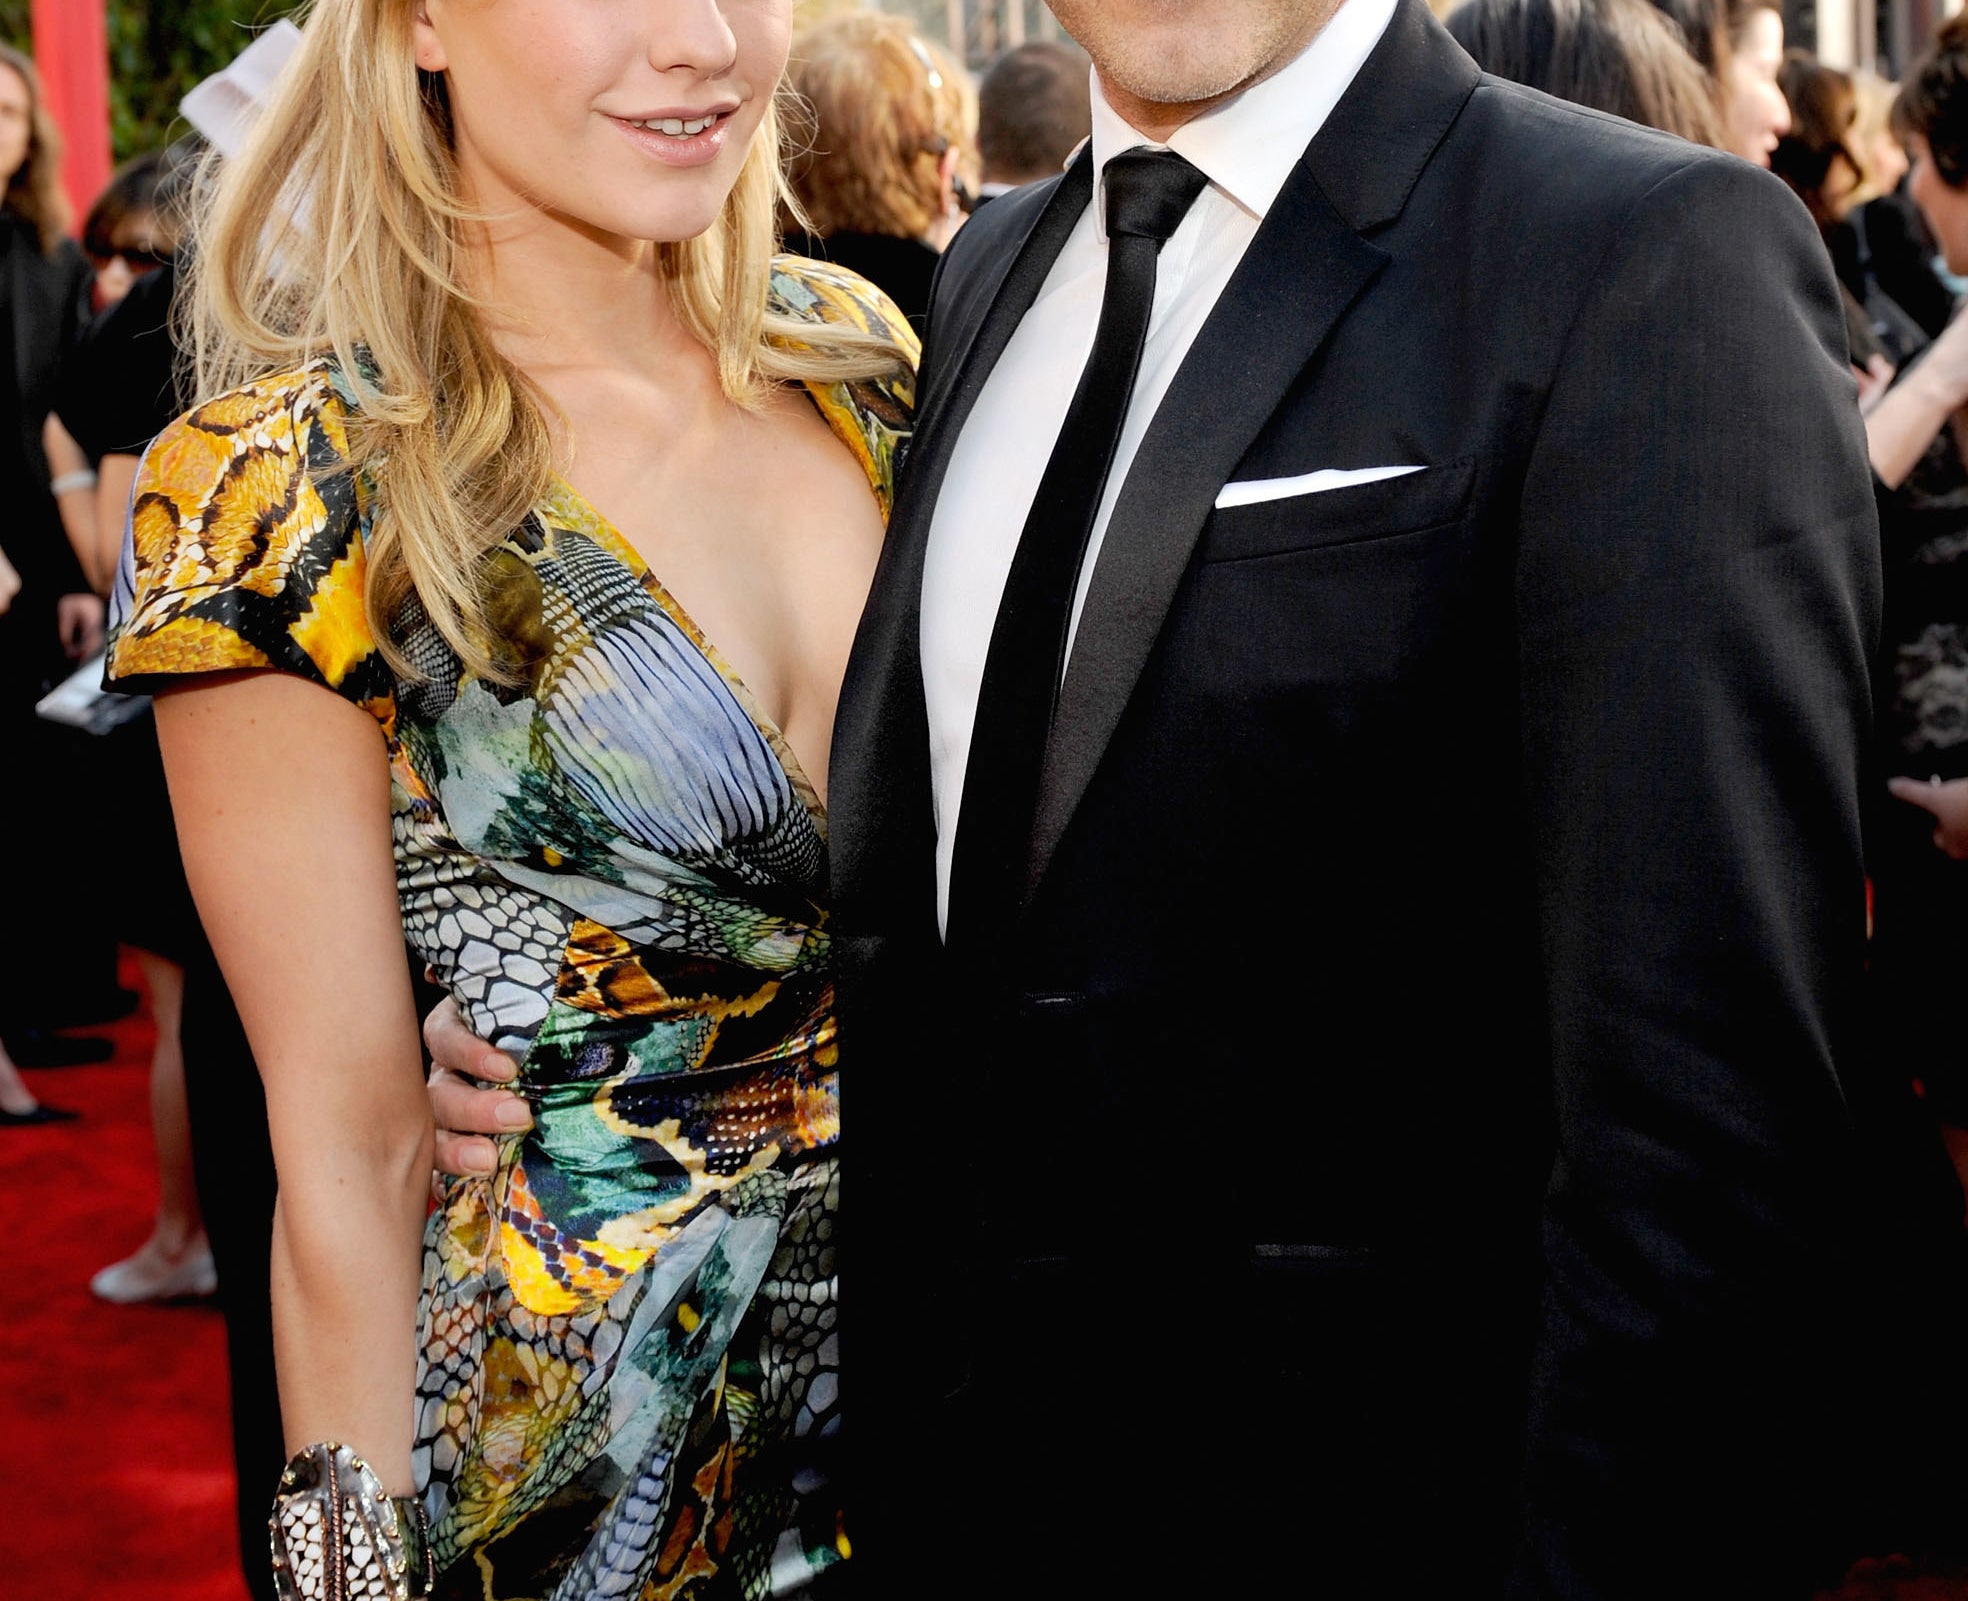 Anna Paquin and Stephen Moyer on the red carpet of the16th Annual Screen Actors Guild Awards at the Shrine Auditorium on January 23, 2010 .